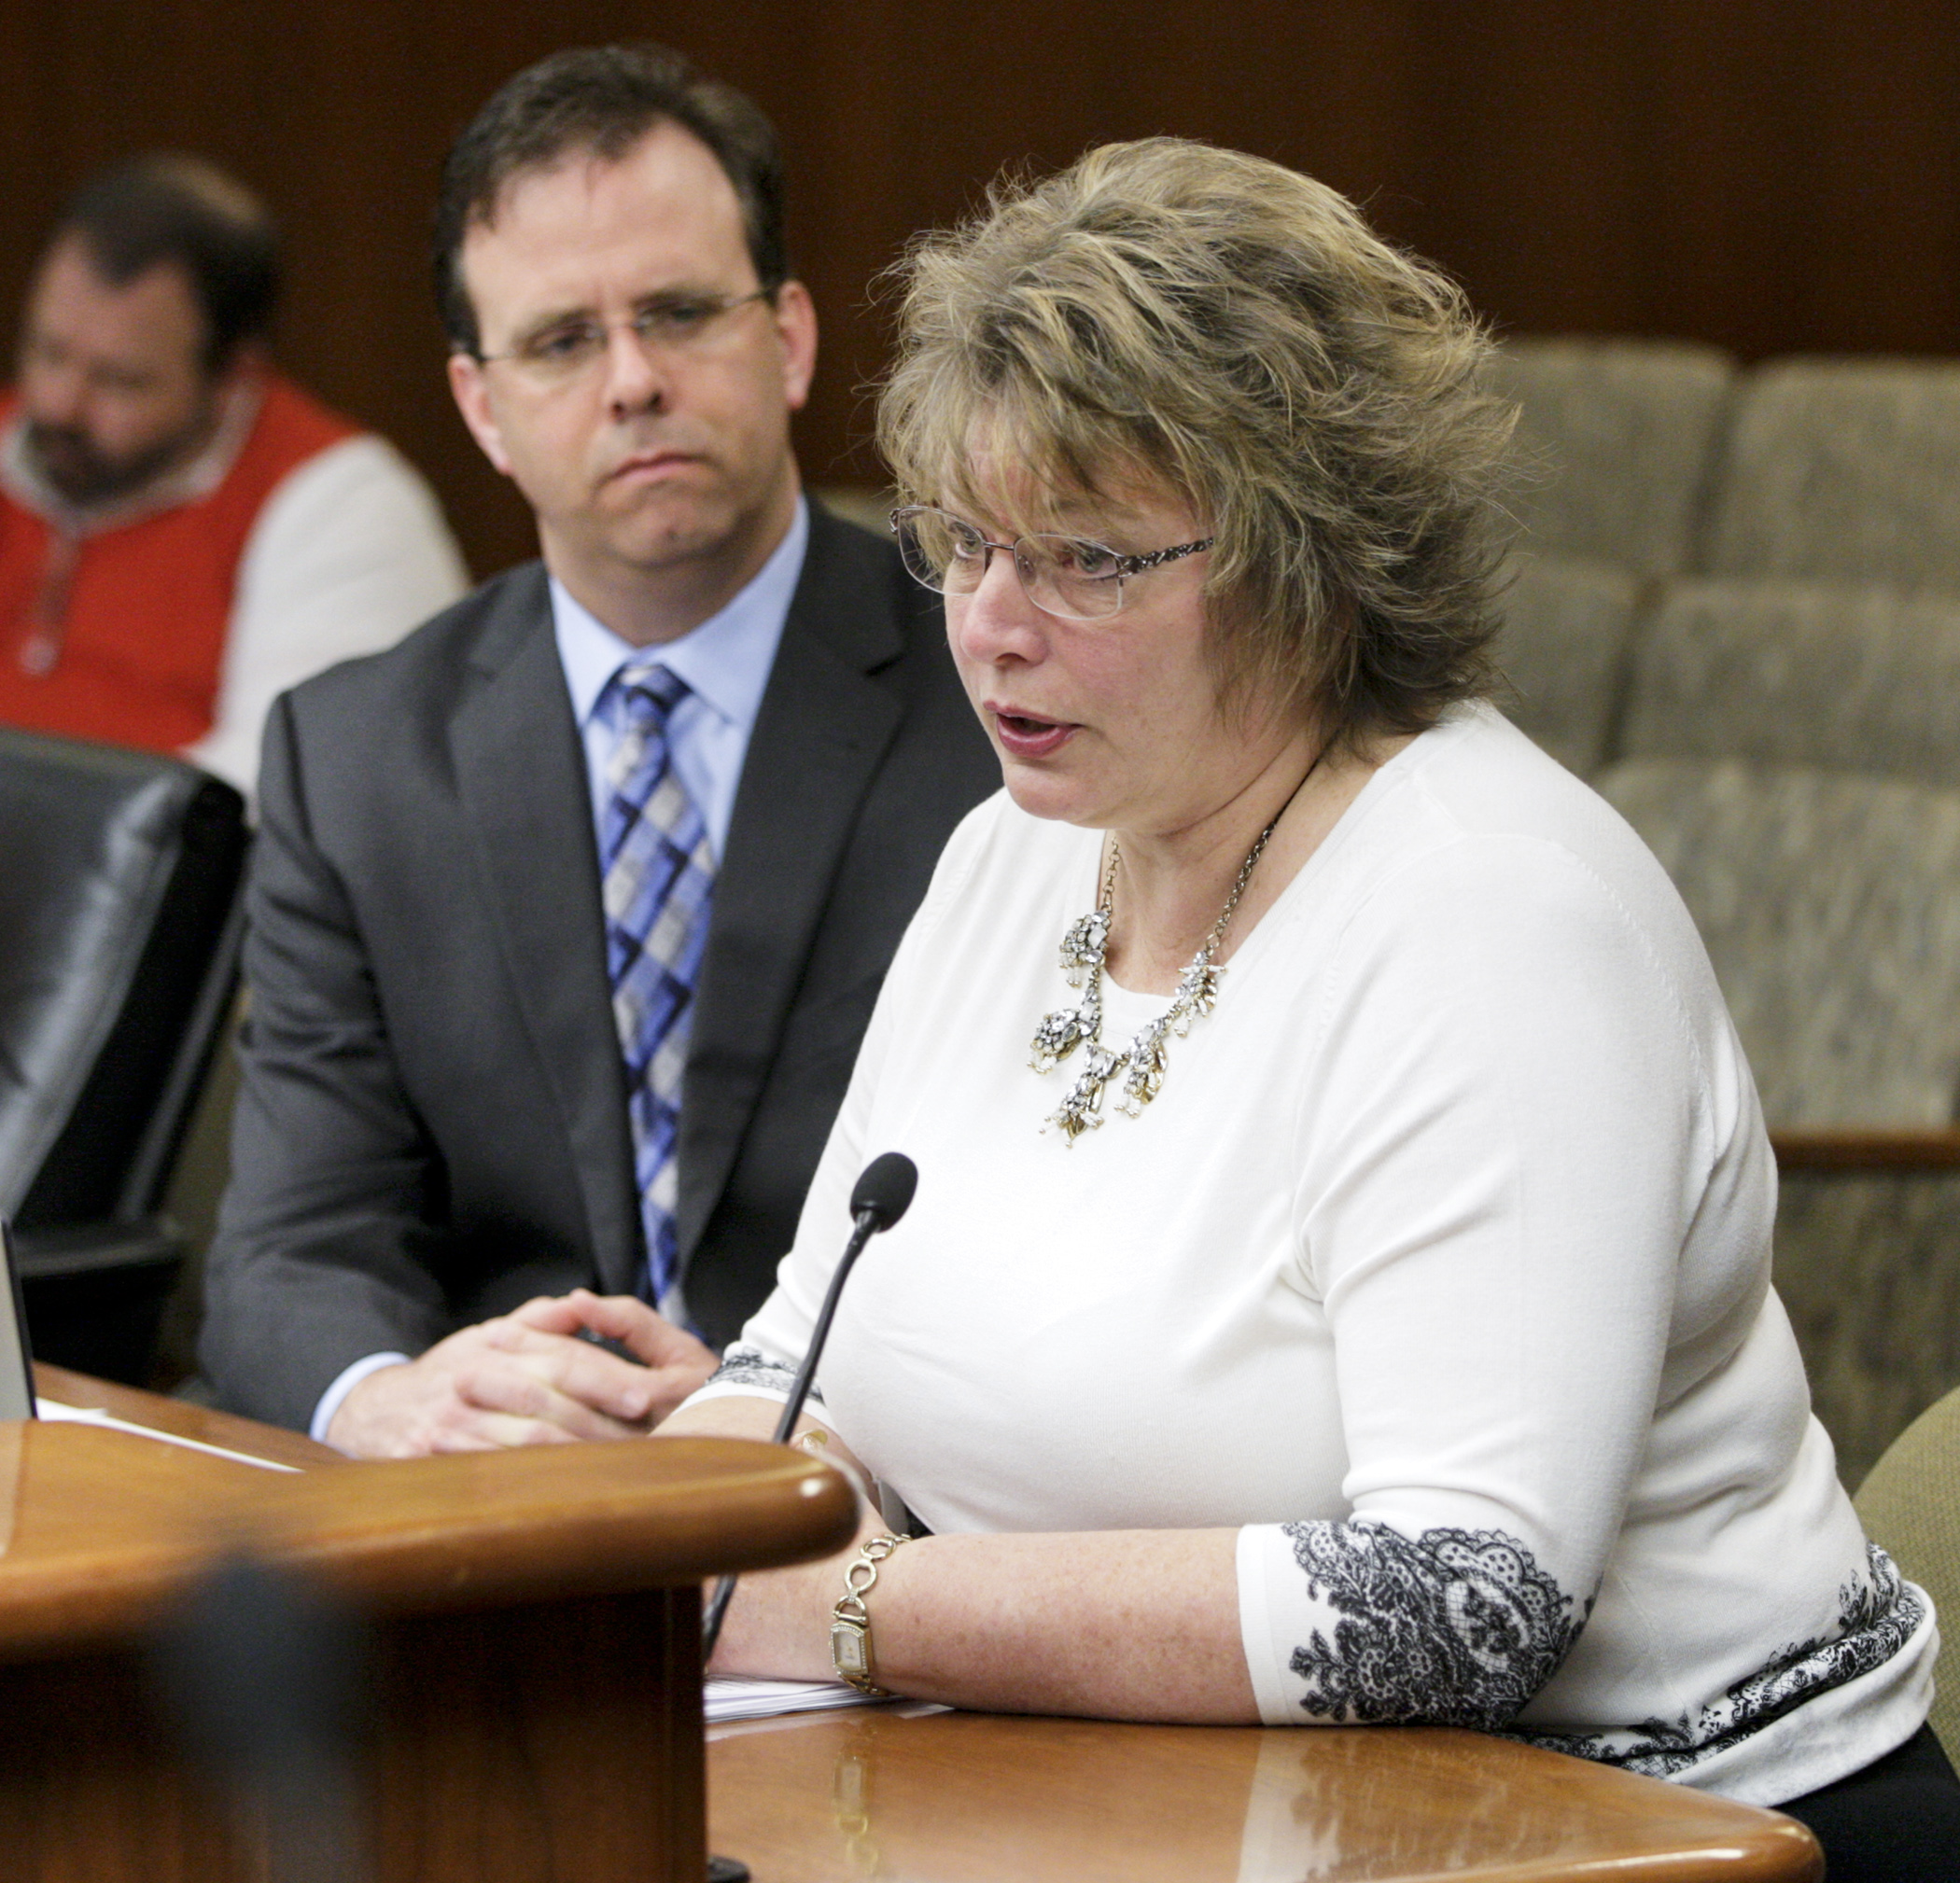 Cathy Ciaciura talks about her son, Lance, who was killed by an inattentive driver, as she testifies on HF1085, sponsored by Rep. Pat Garofalo, left, to enhance penalties for careless driving resulting in death or great bodily harm. Photo by Paul Battaglia